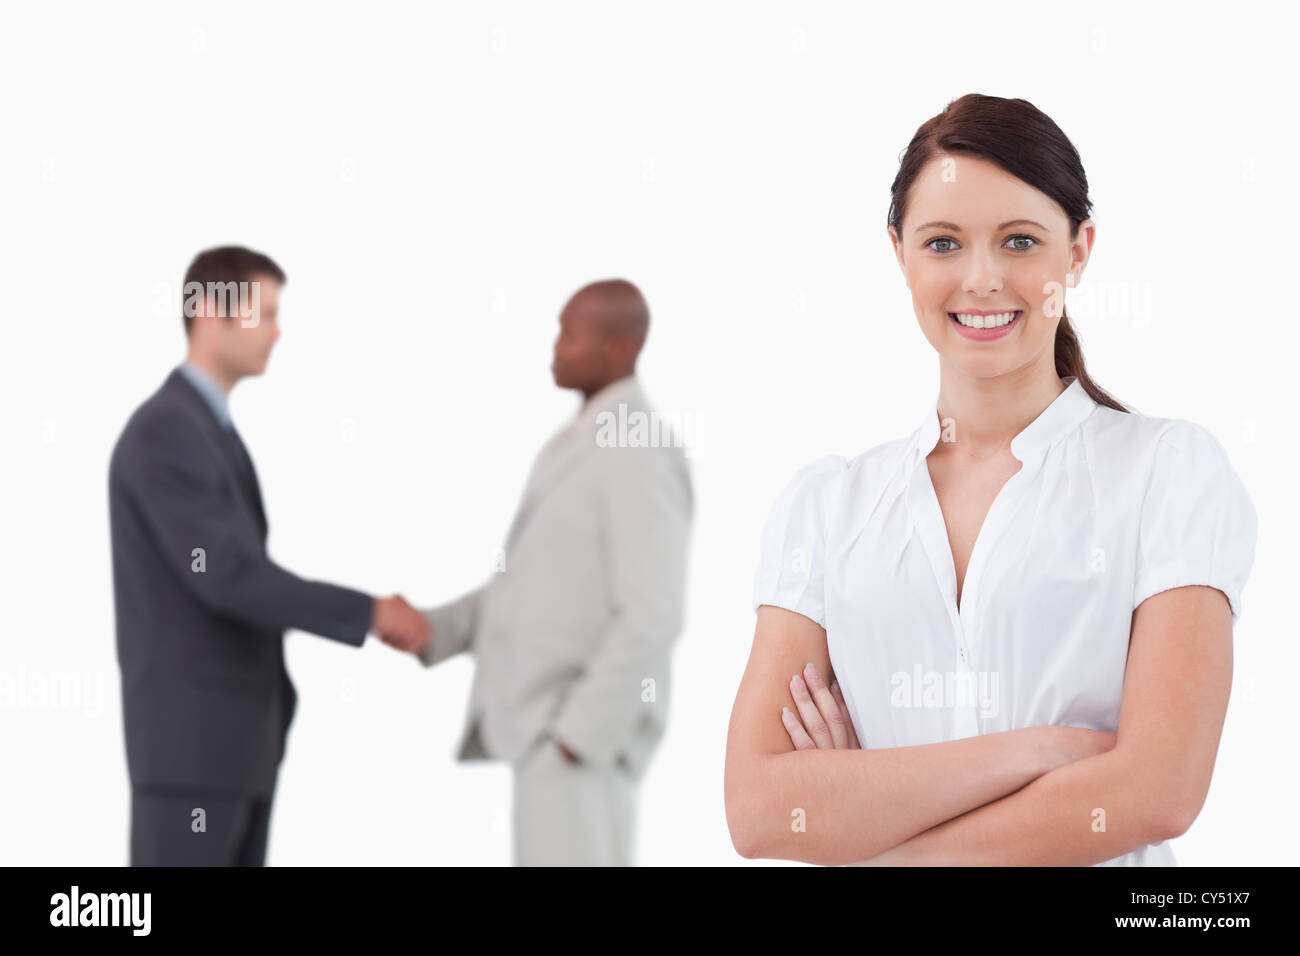 Businesswoman with arms folded and hand shaking trading partners behind her Stock Photo